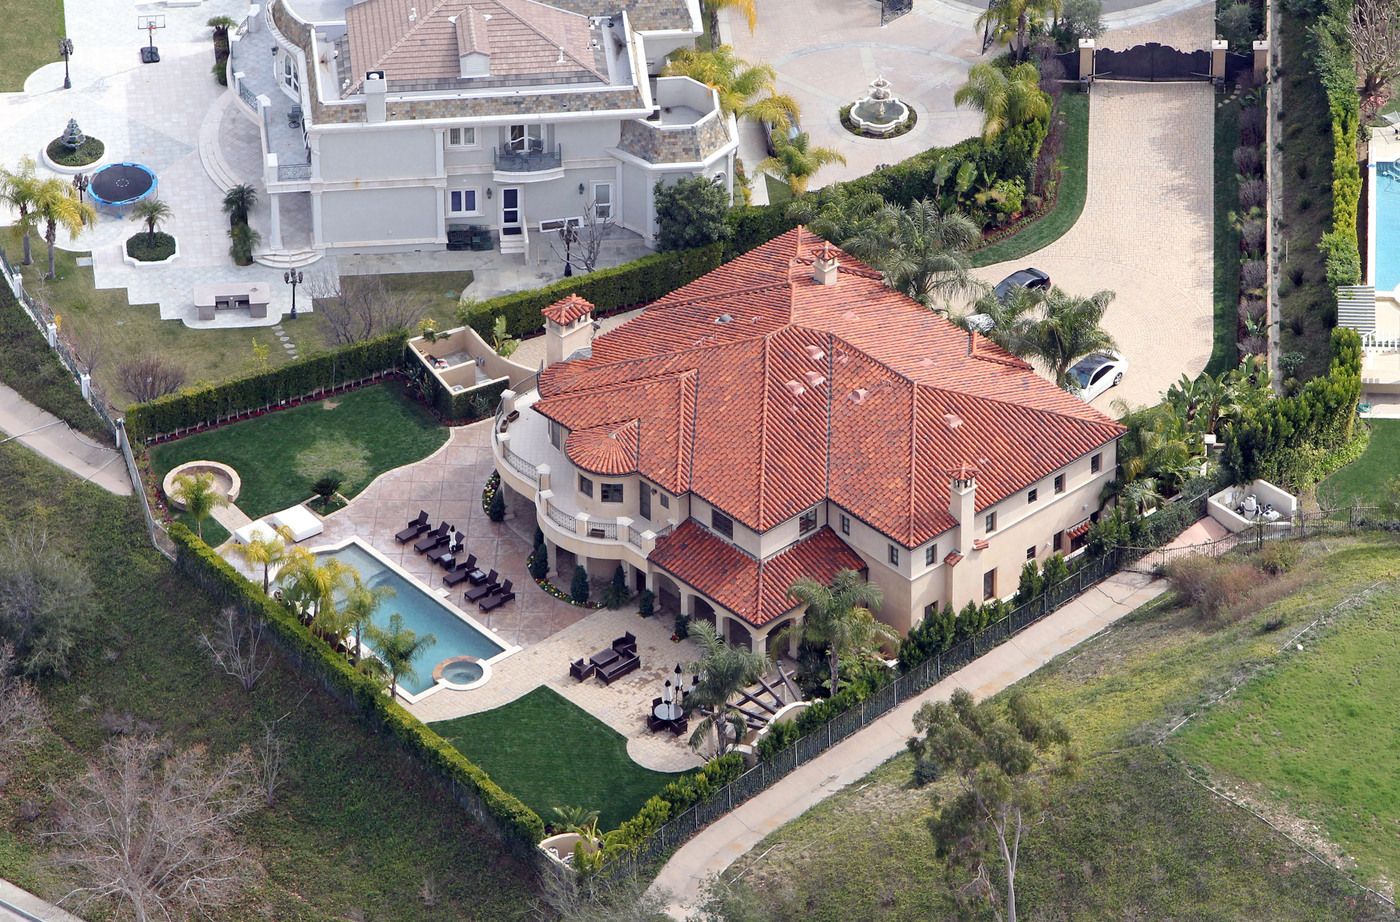 Khloe Kardashian and Lamar Odom have listed their marital home for sale with an asking price of $5.5 million